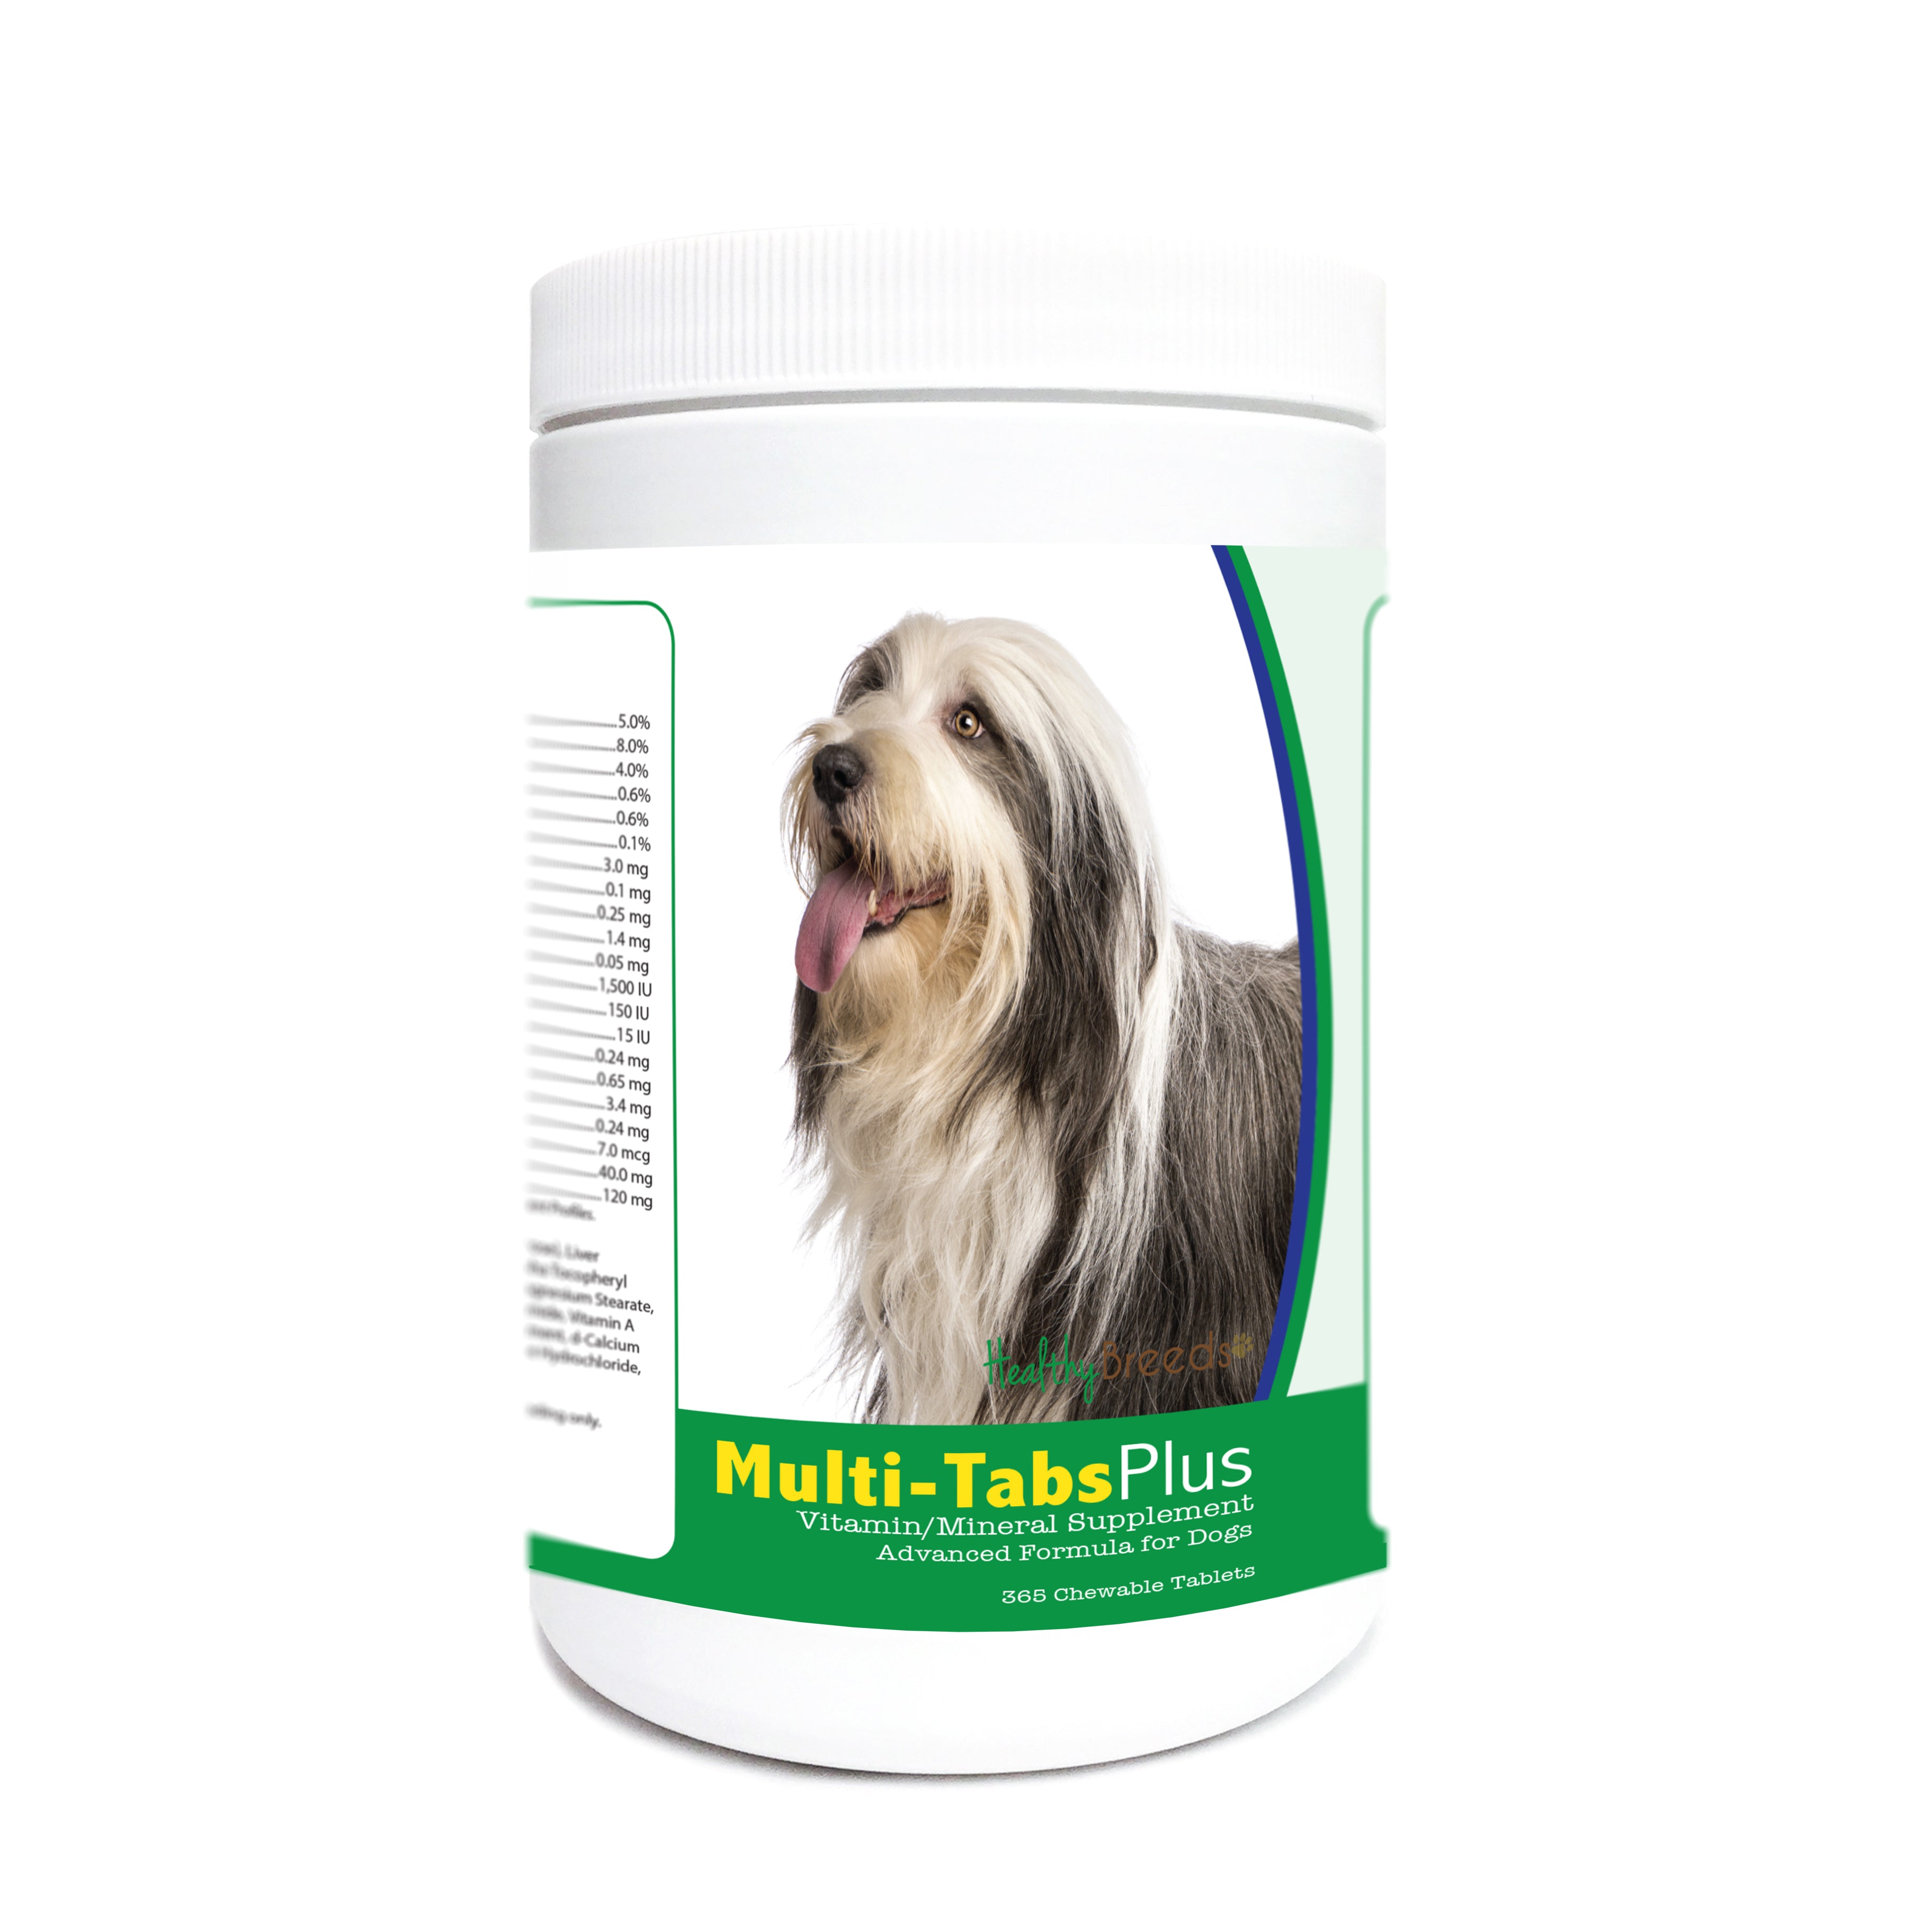 Bearded Collie Multi-Tabs Plus Chewable Tablets 365 Count